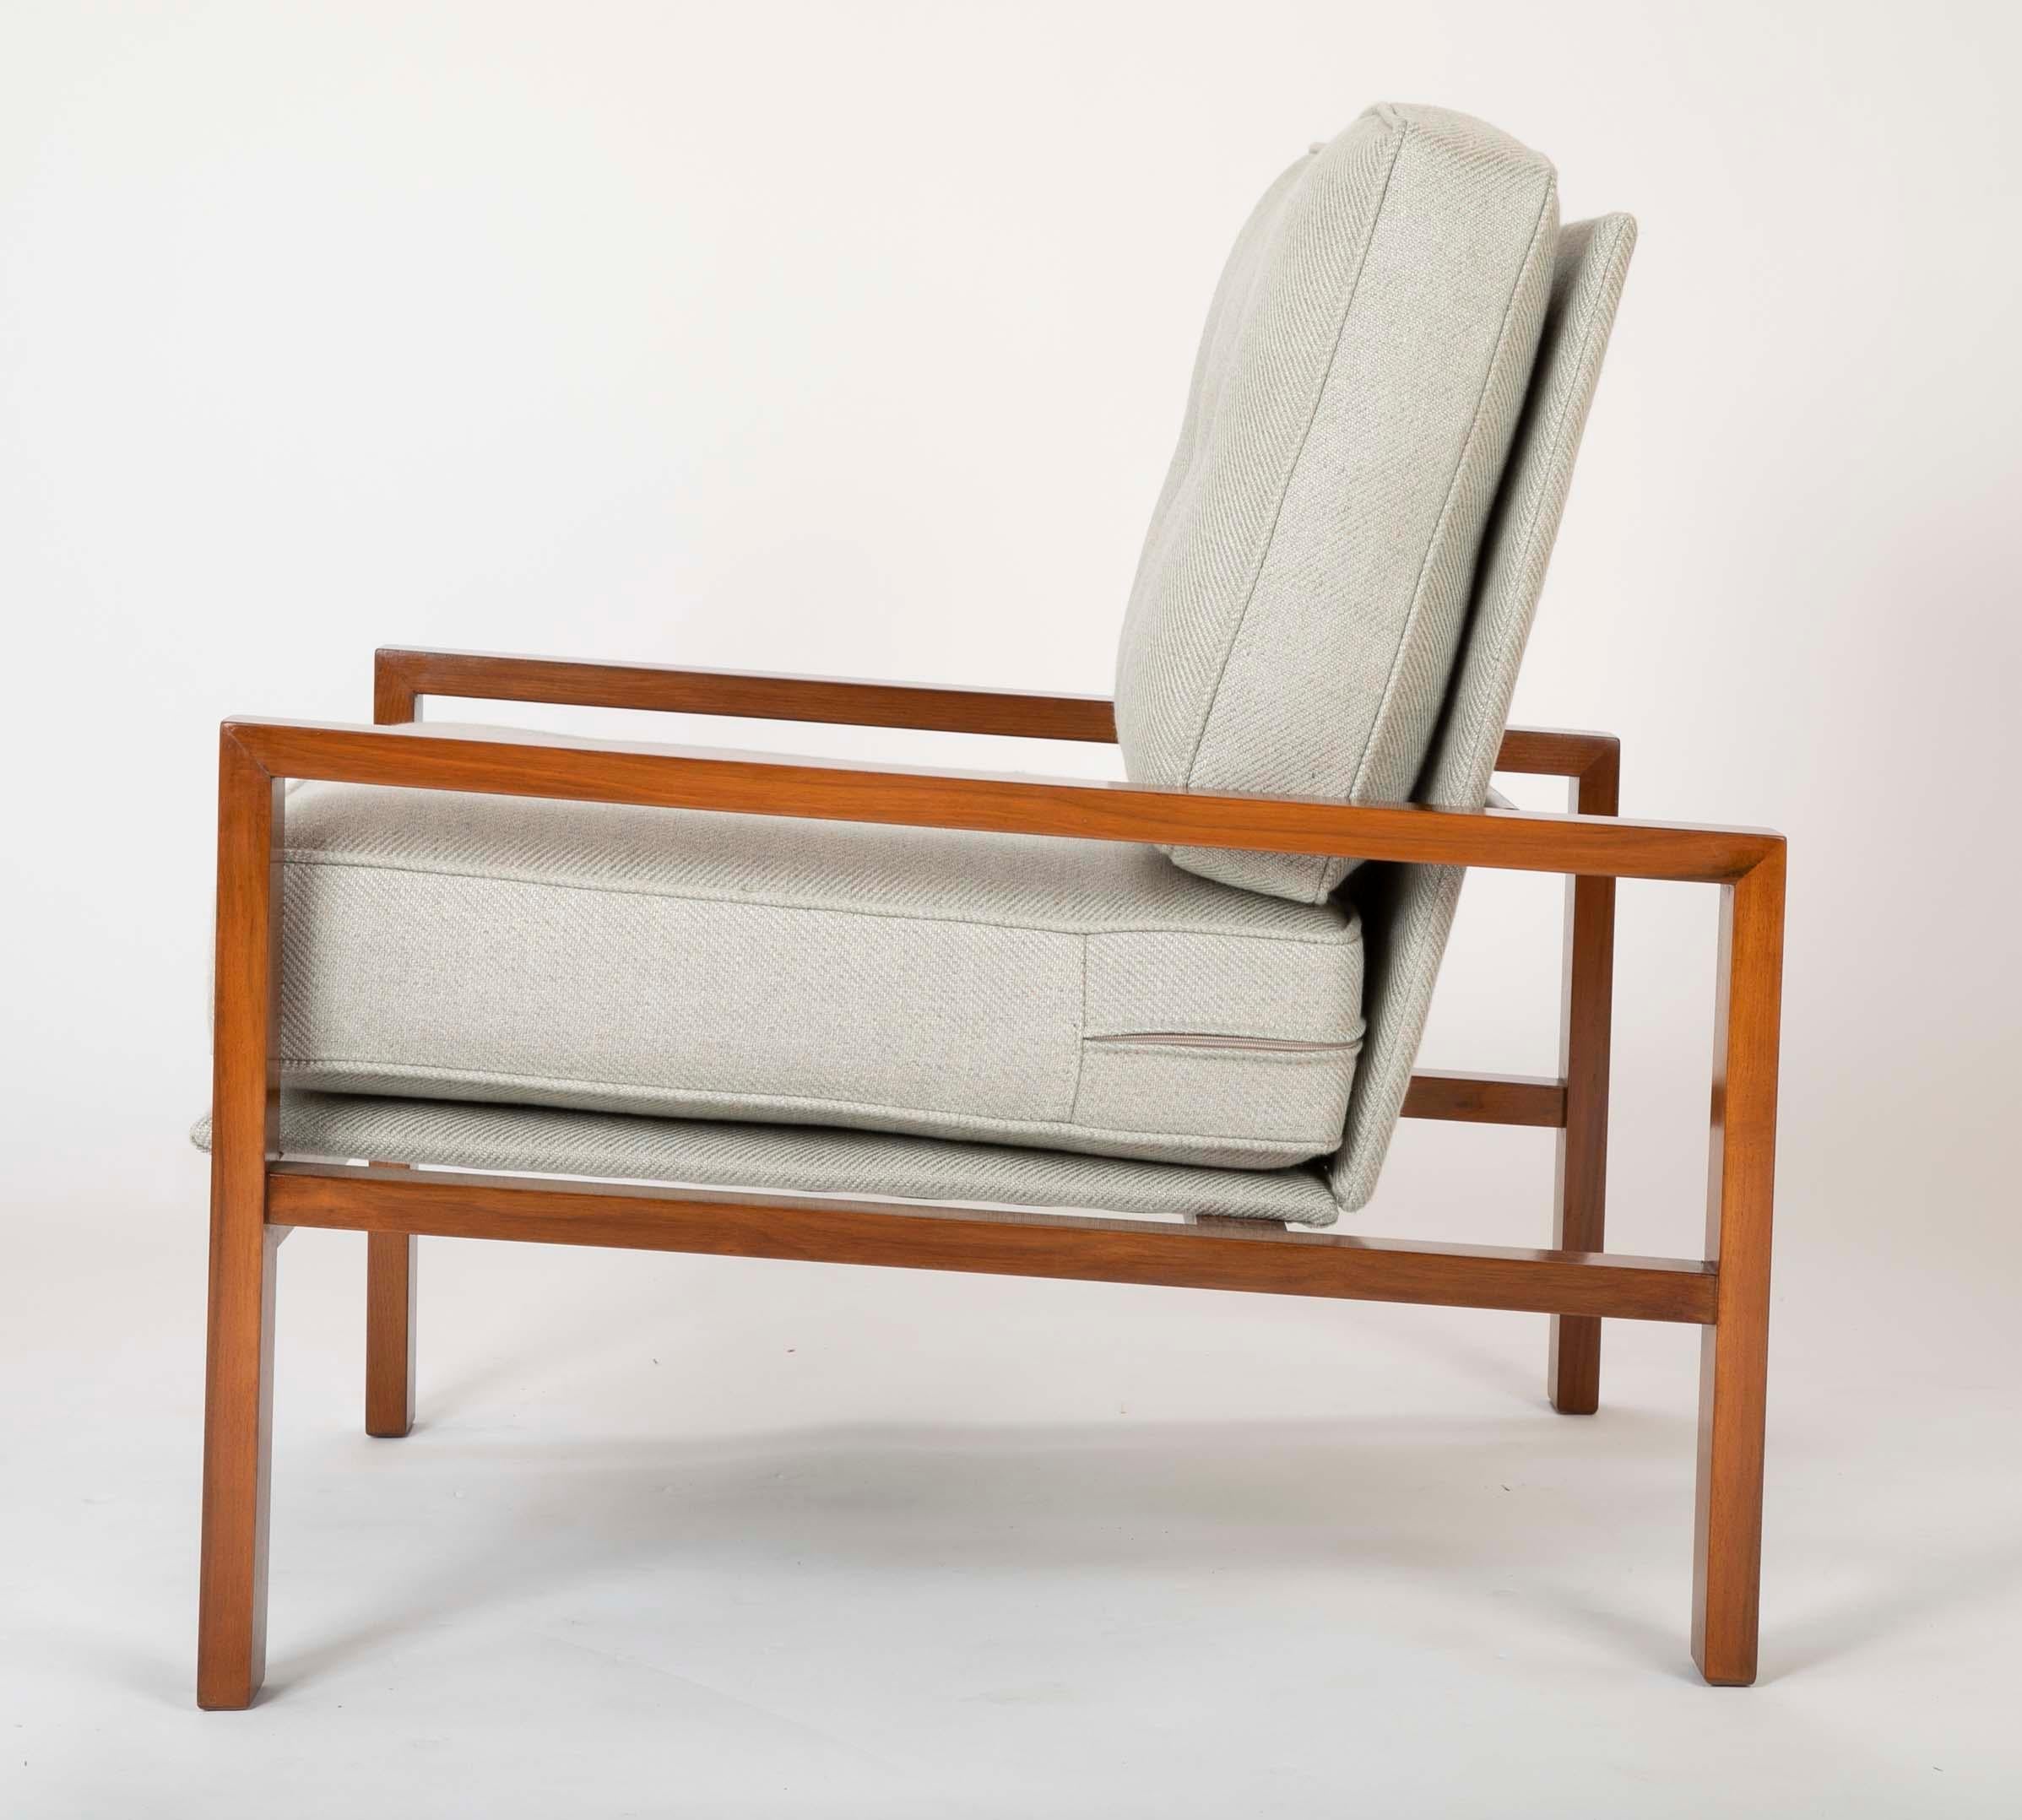 Wood Prototype Van Keppel and Green Lounge Chair with Great Provenance